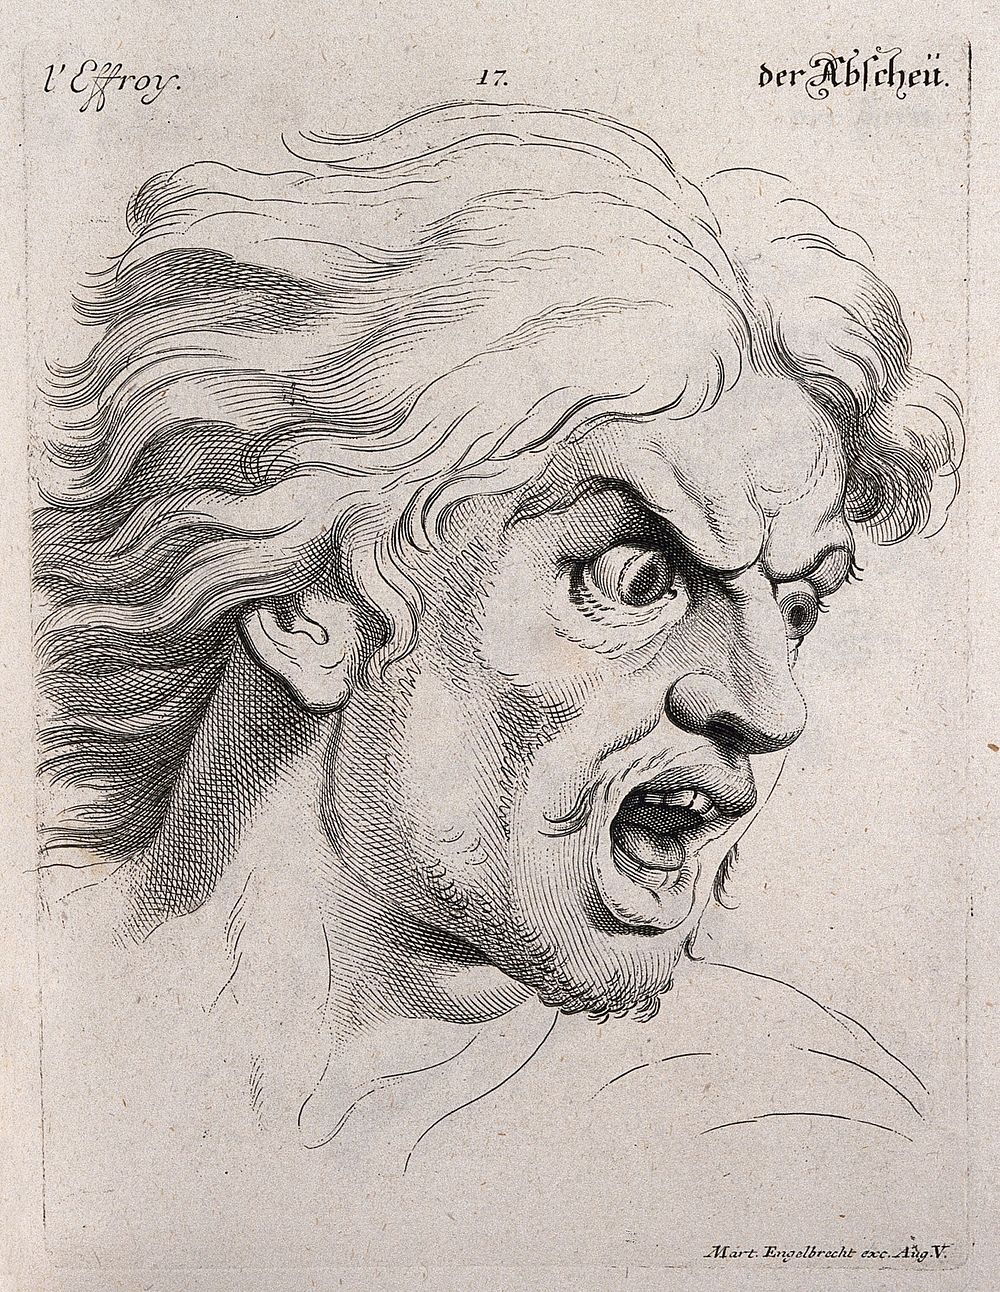 The face of a man experiencing fear. Engraving by M. Engelbrecht , 1732, after C. Le Brun.